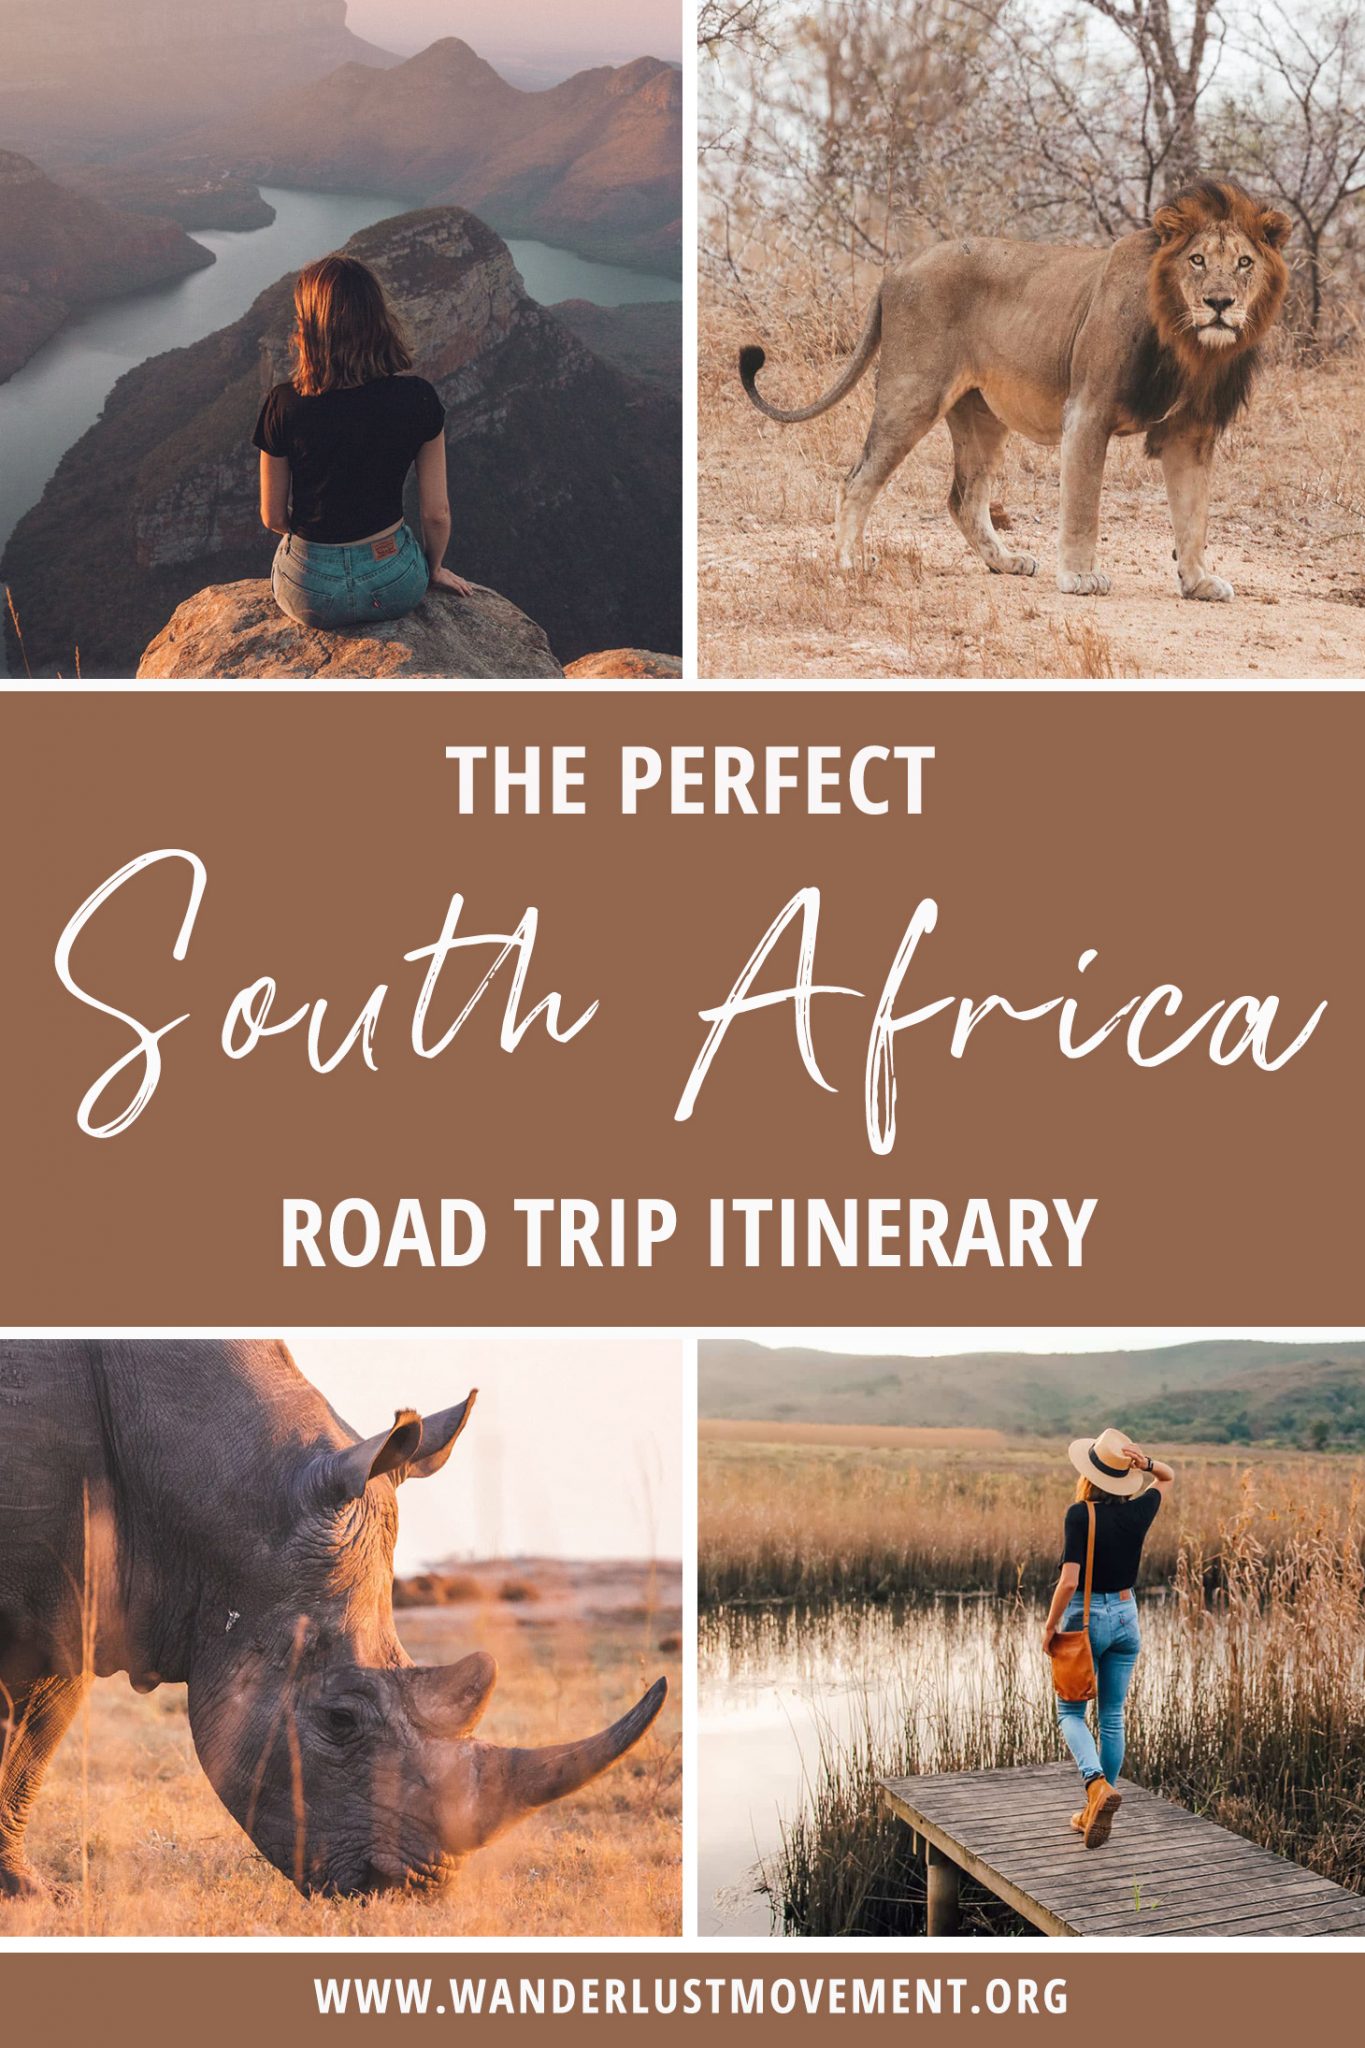 The Perfect Itinerary for an Epic South Africa Road Trip